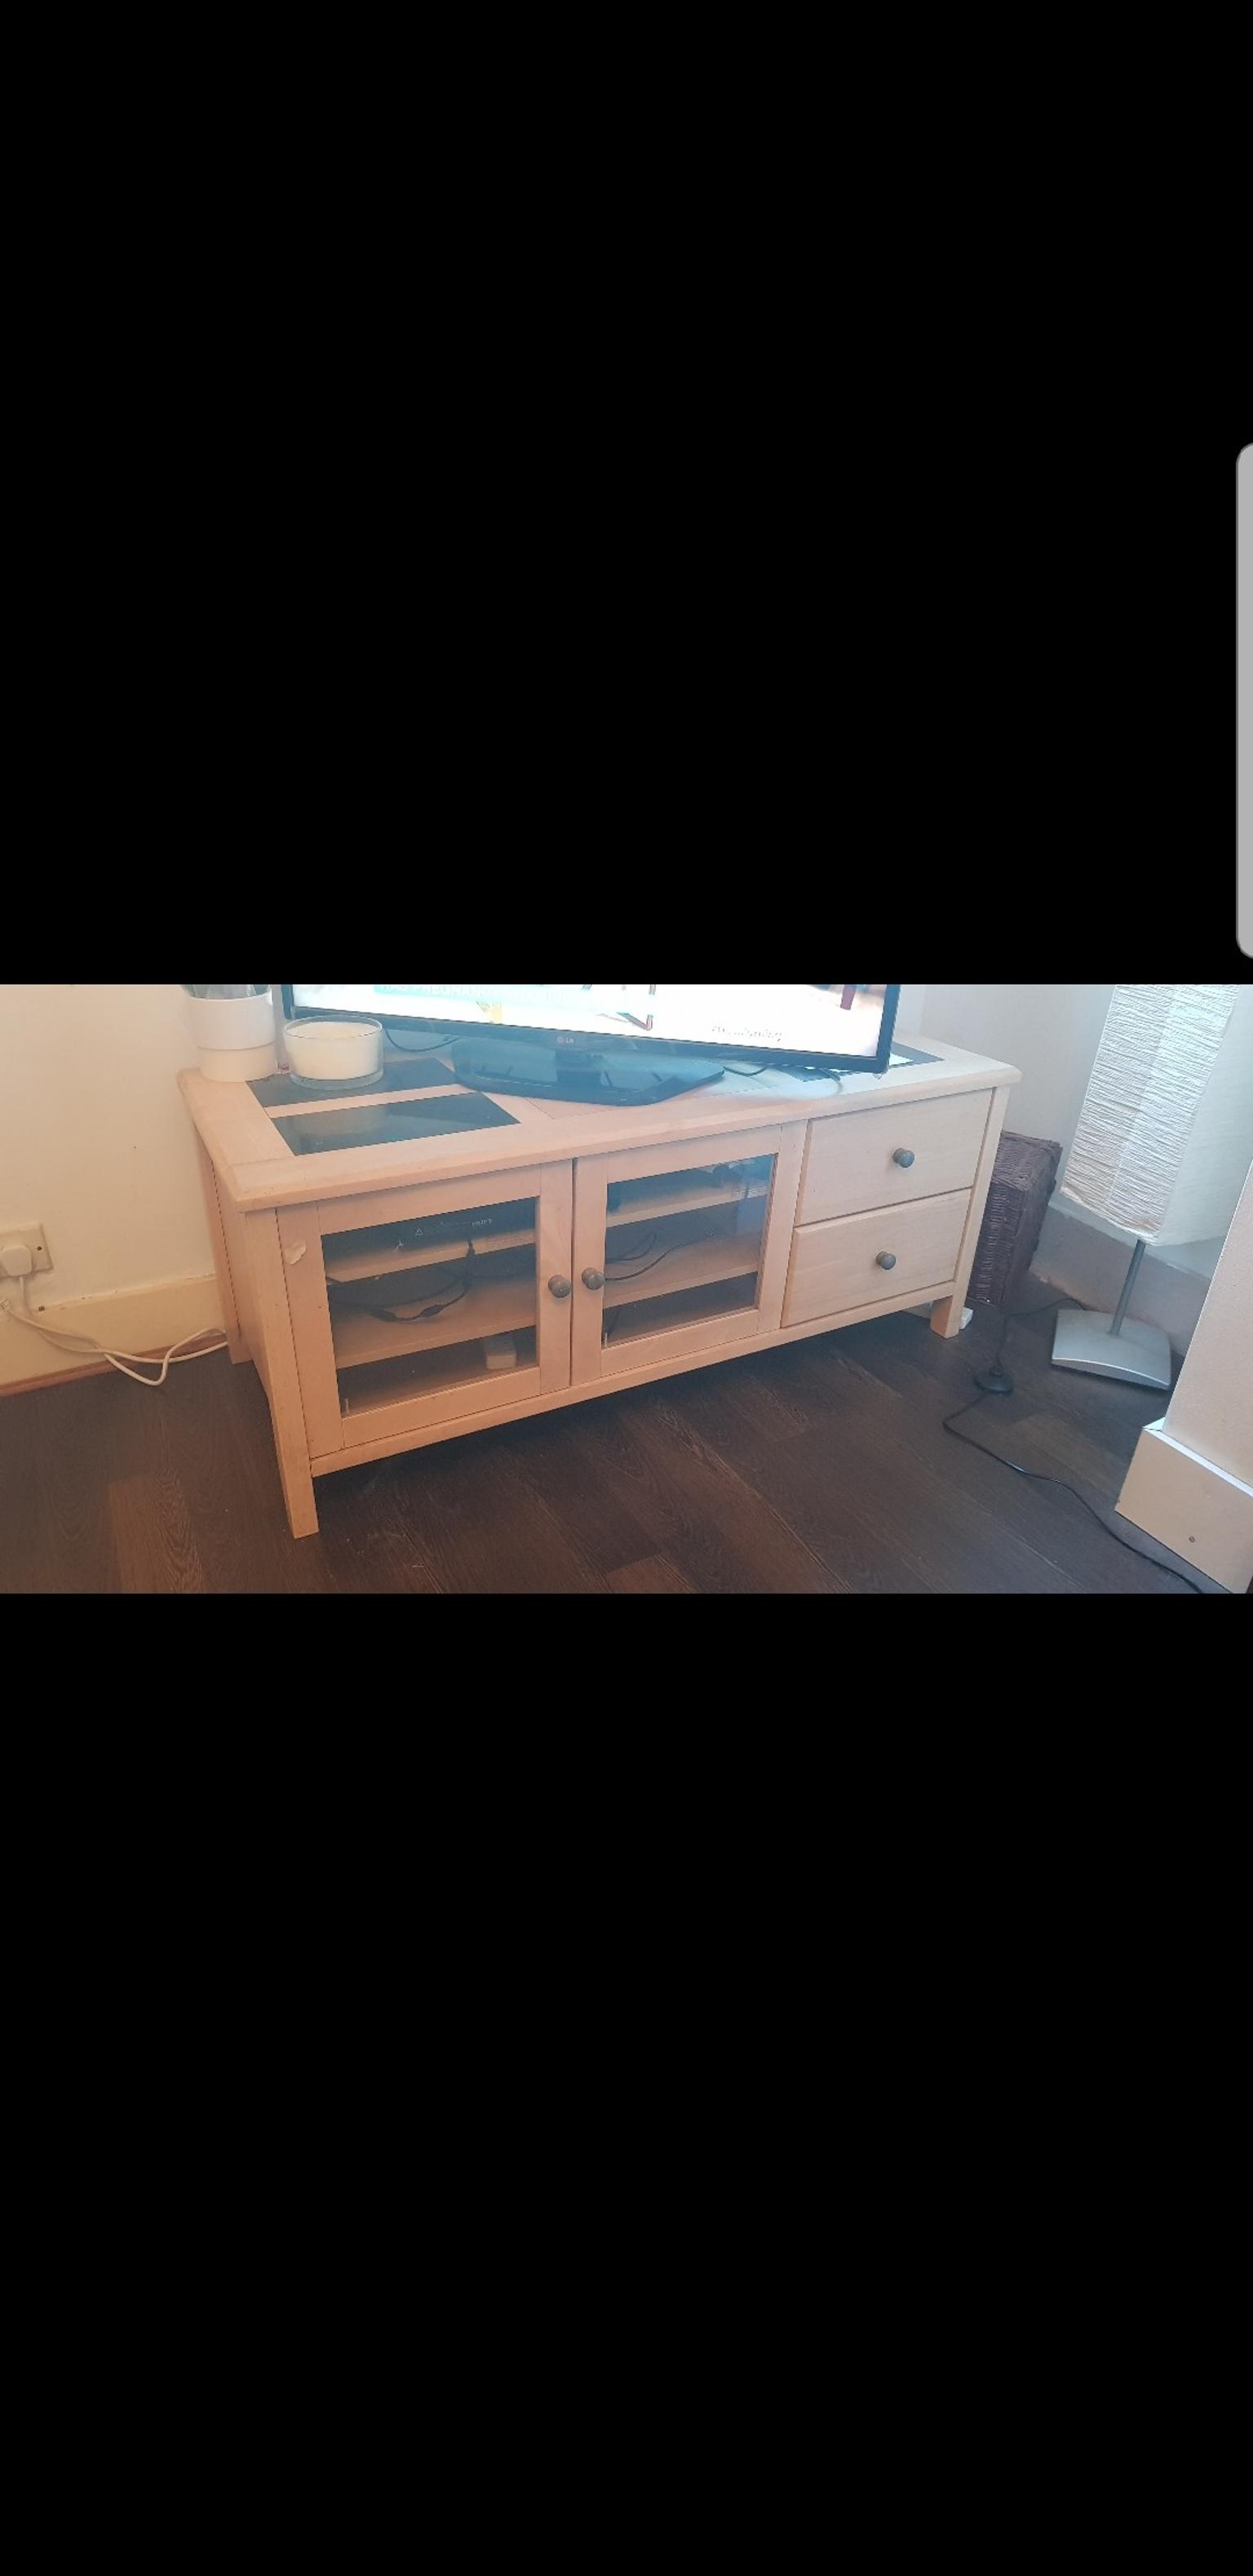 Homebase Georgia Wooden Tv Stand Cabinet In Sk2 Stockport Fur 45